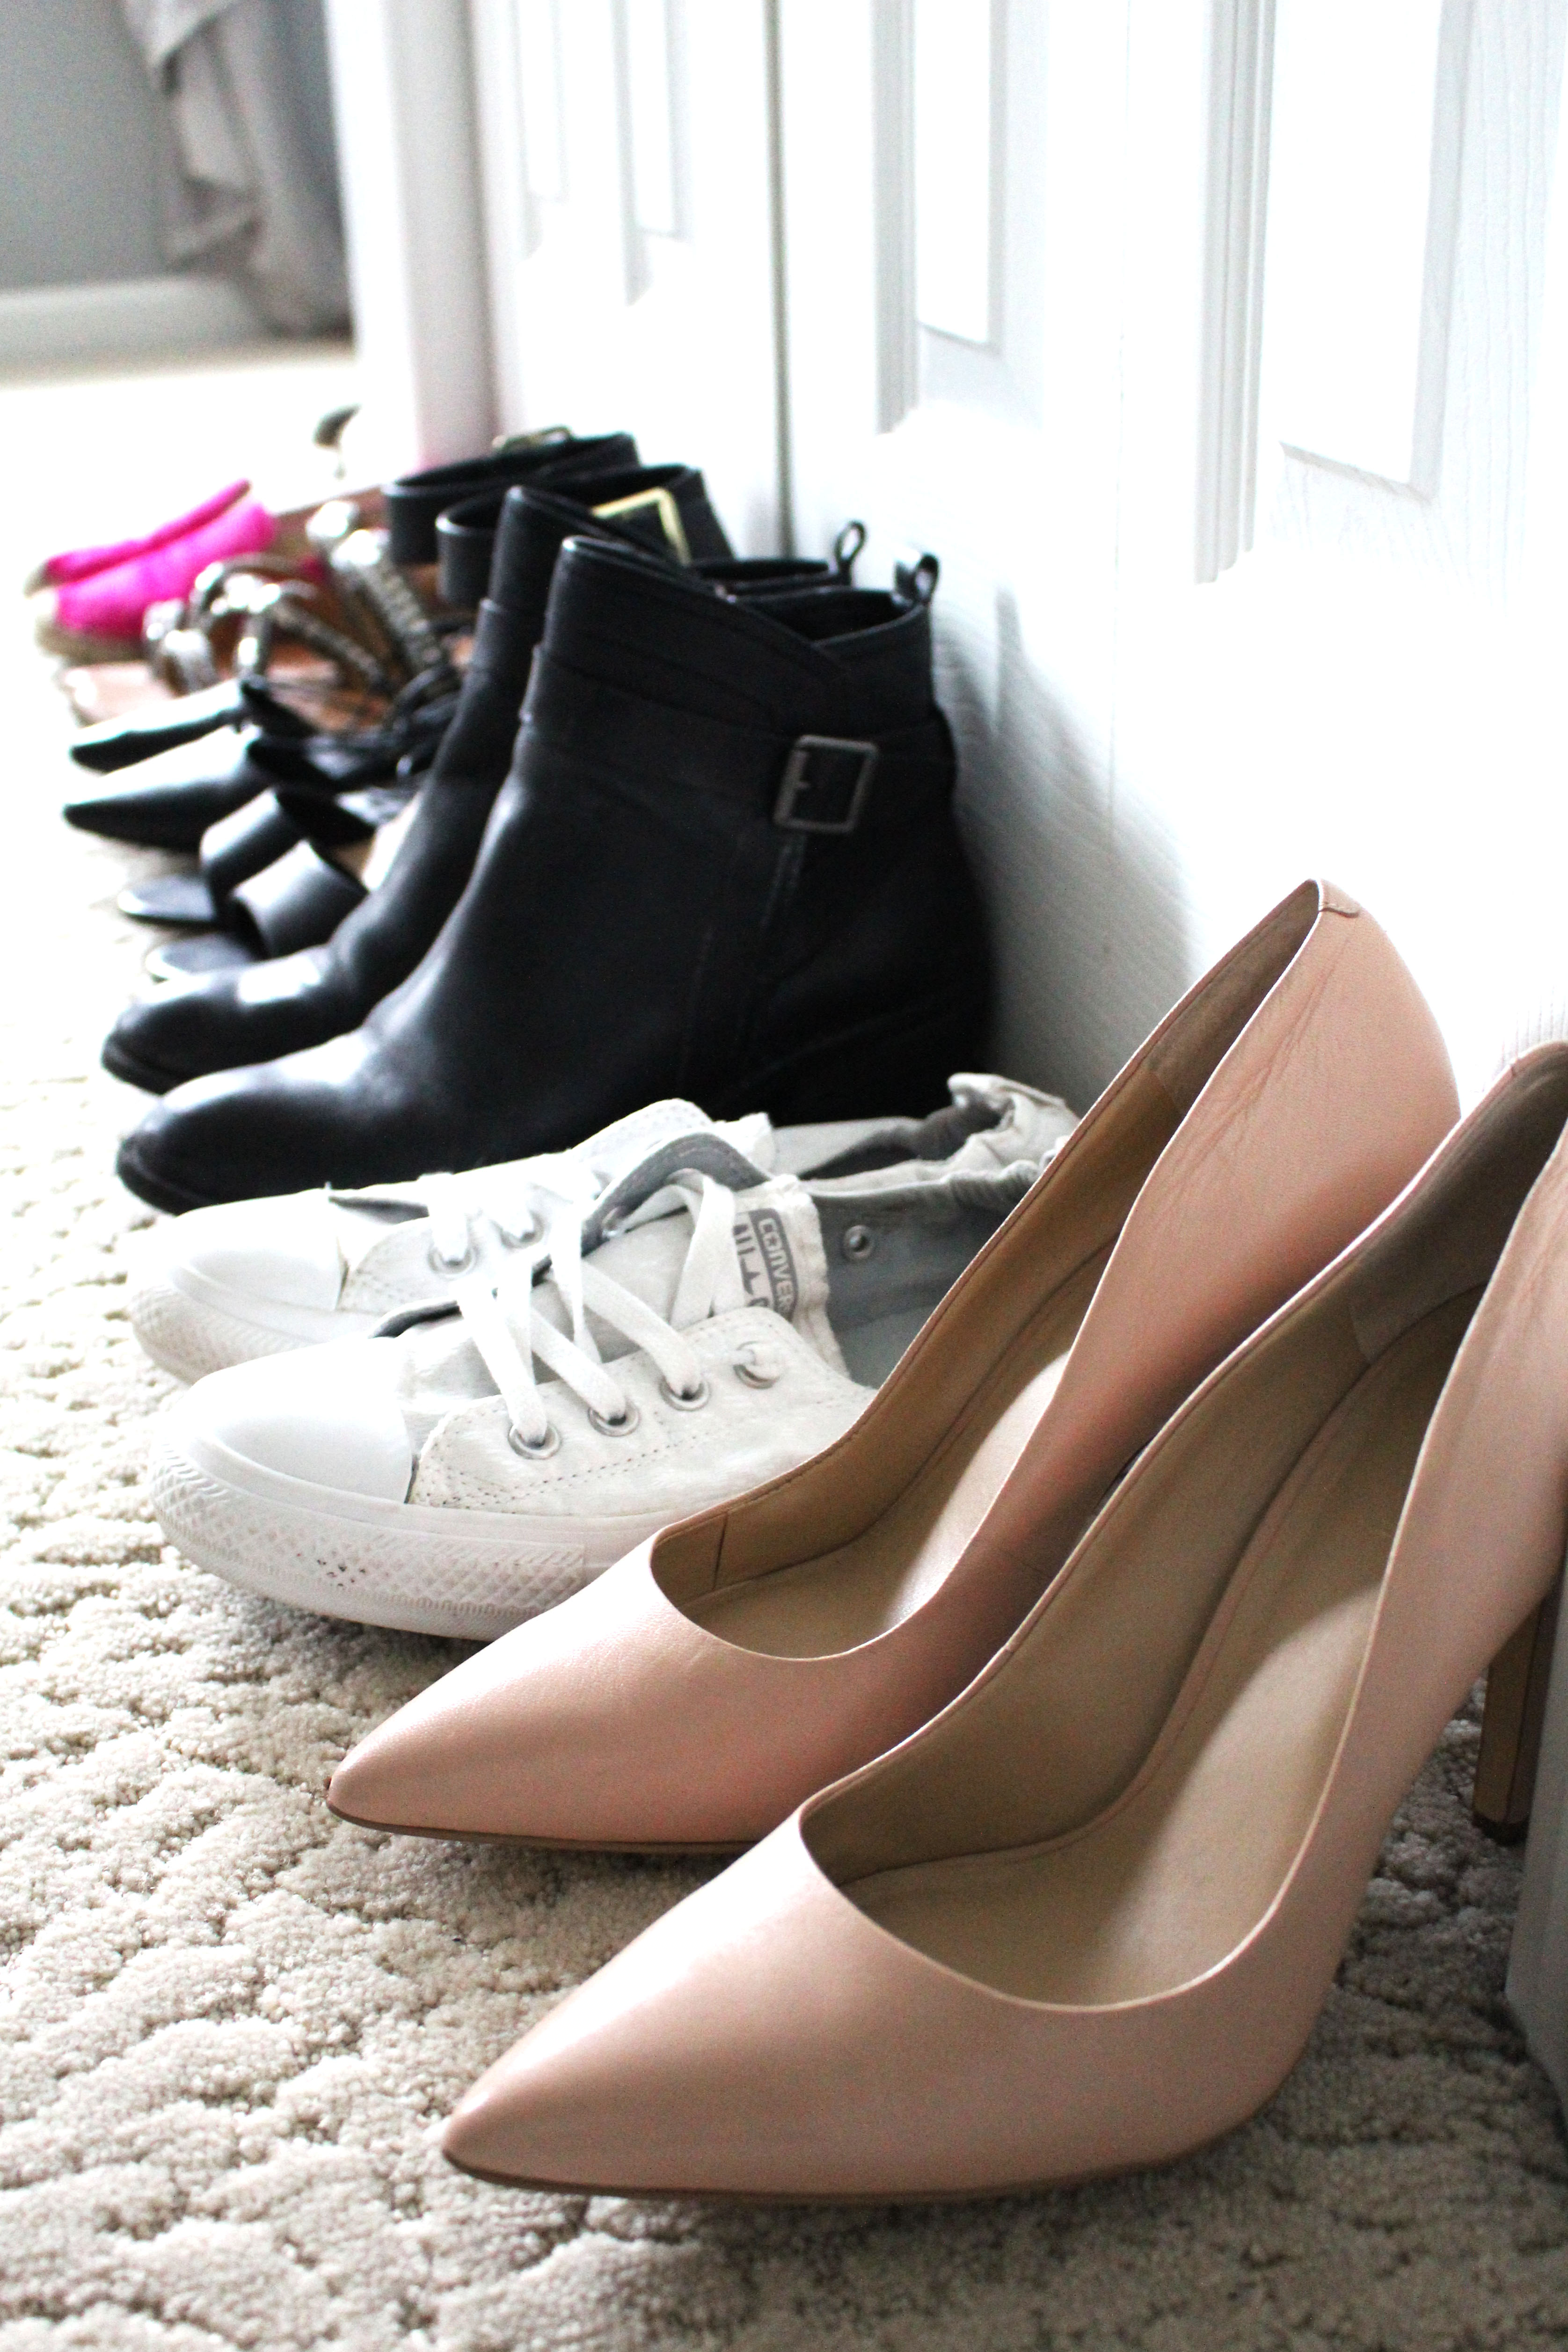 Building a Luxe Wardrobe: Let’s Start With Shoes